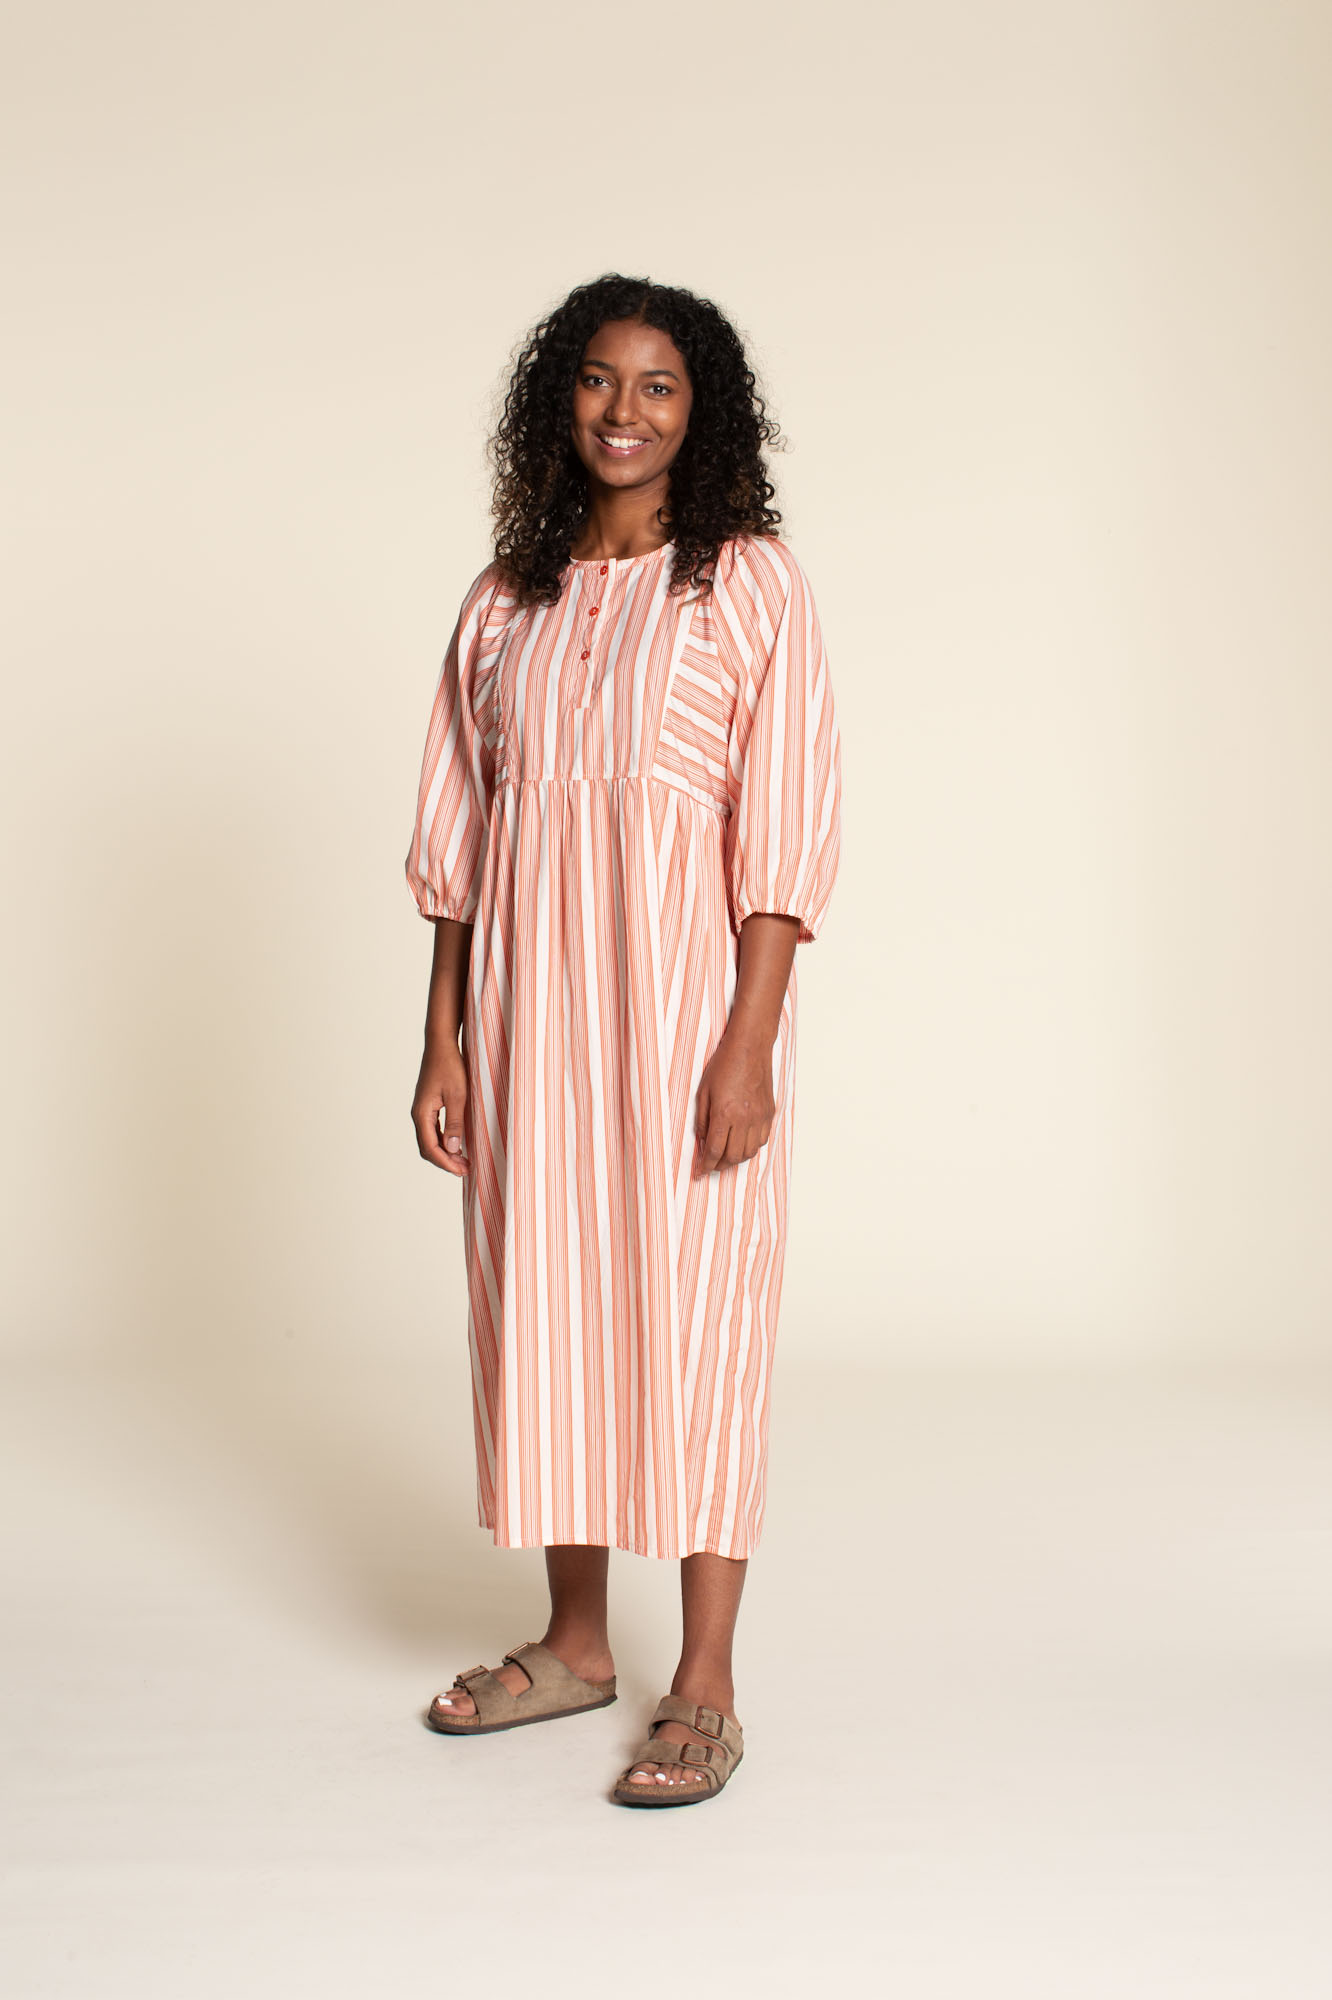 Woman wearing the Balka Dress sewing pattern from Wardrobe by Me on The Fold Line. A dress pattern made in cotton, linen, viscose, or silk fabric, featuring kaftan styling, a button placket, gathered sleeves, a gathered skirt, and side seam pockets.